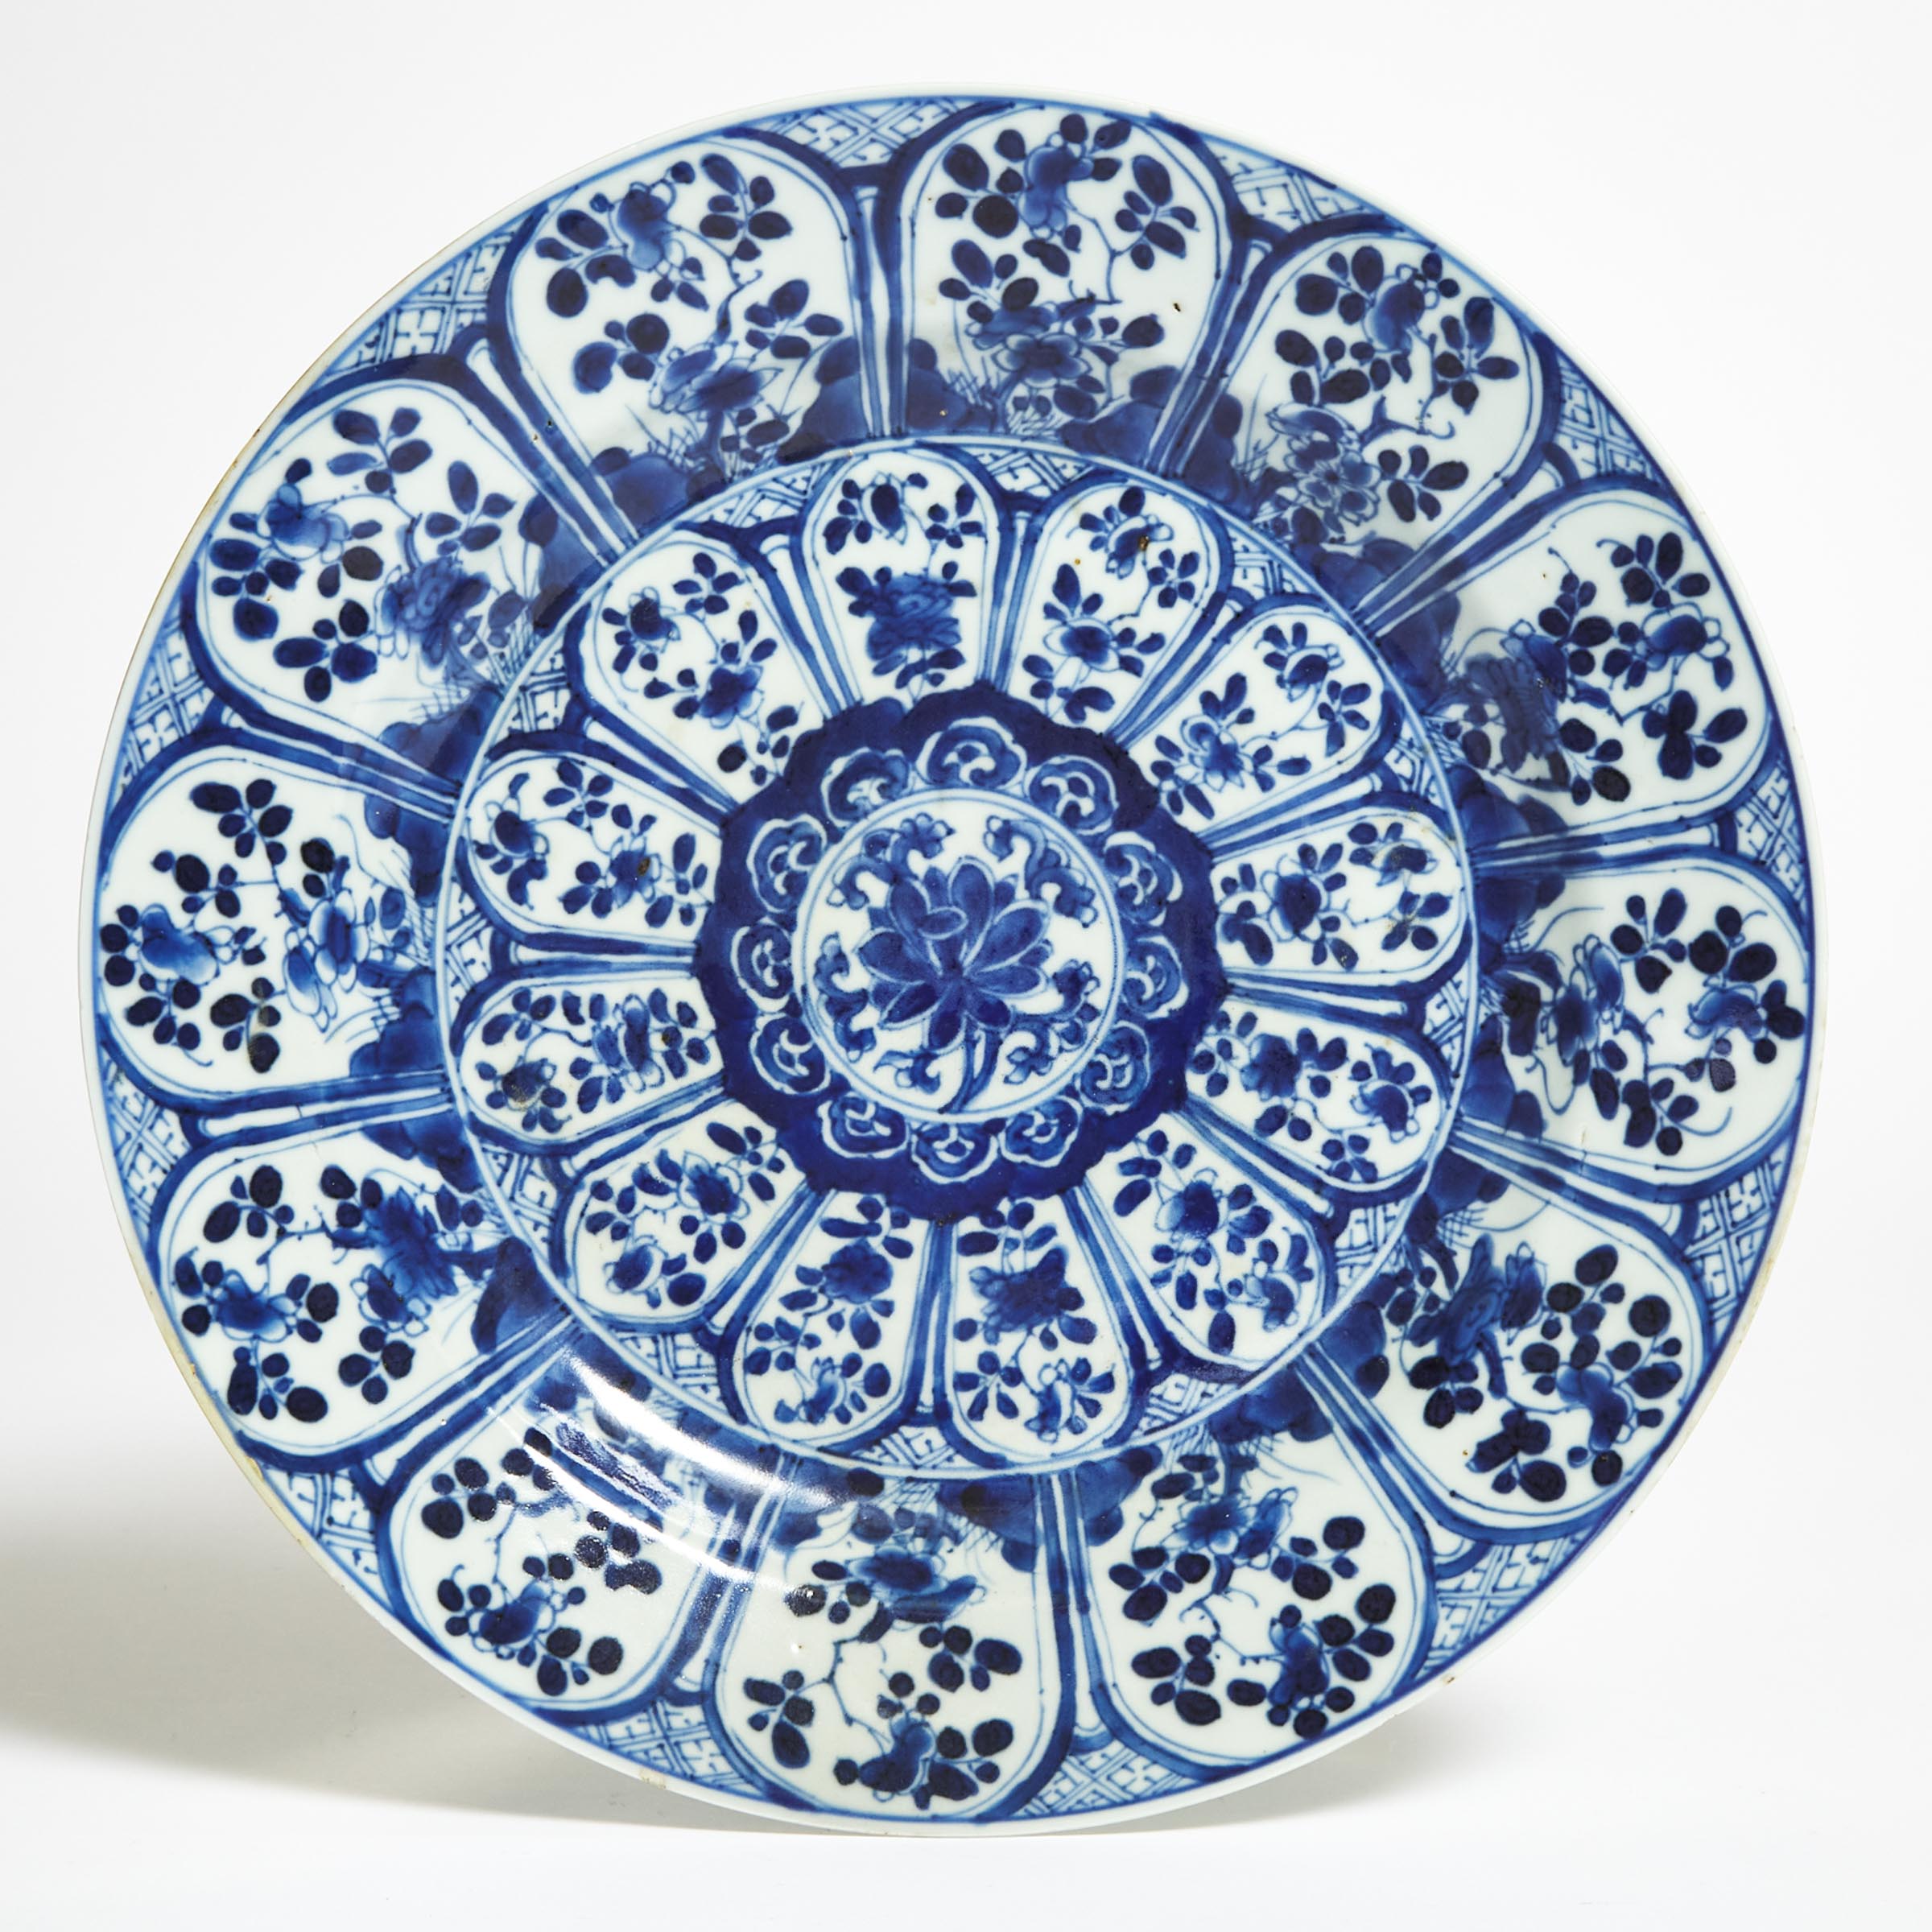 A Blue and White 'Floral' Dish, Kangxi Period (1662-1722)